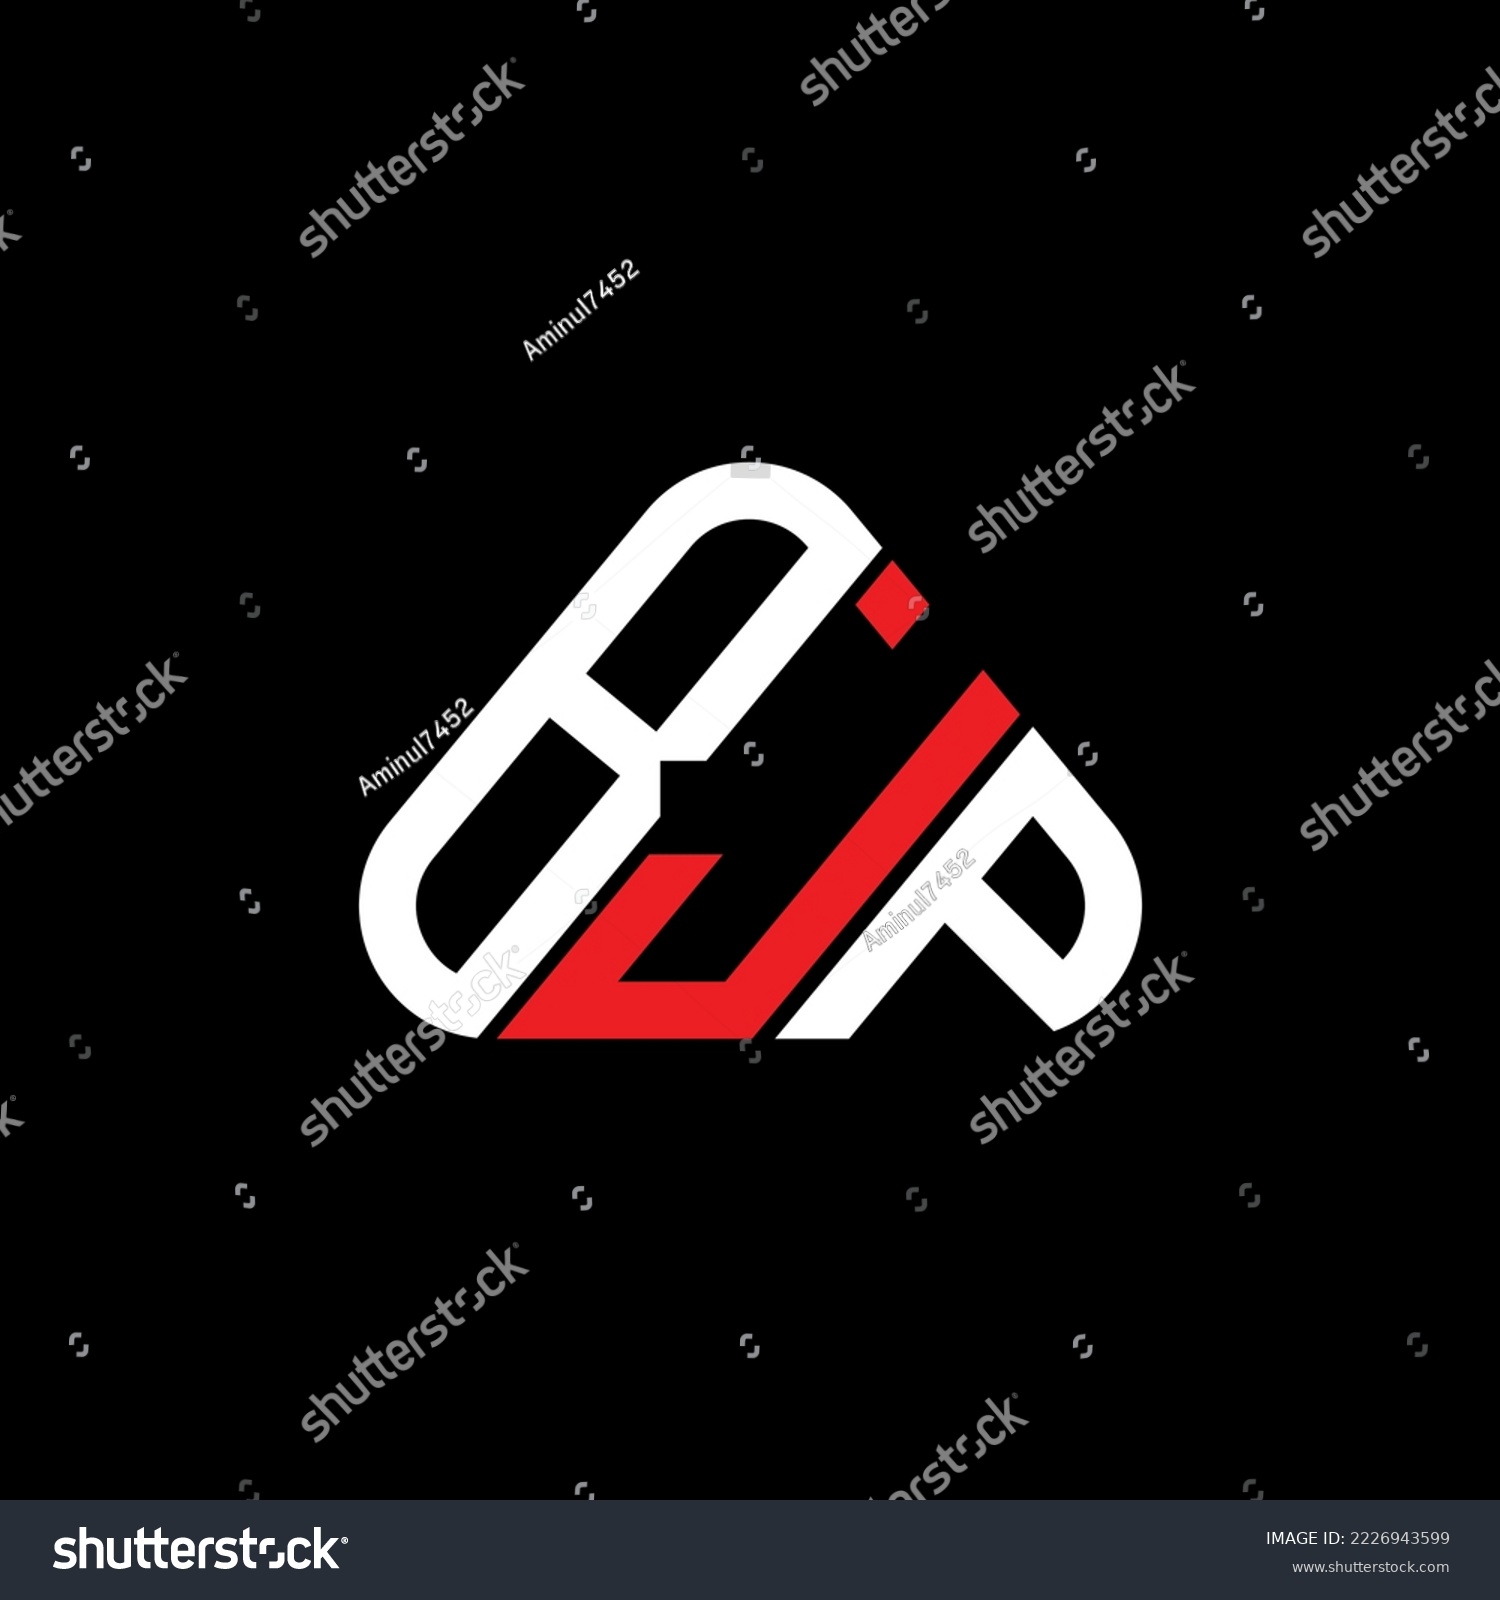 SVG of BJP letter logo creative design with vector graphic, BJP simple and modern logo in round triangle shape. svg